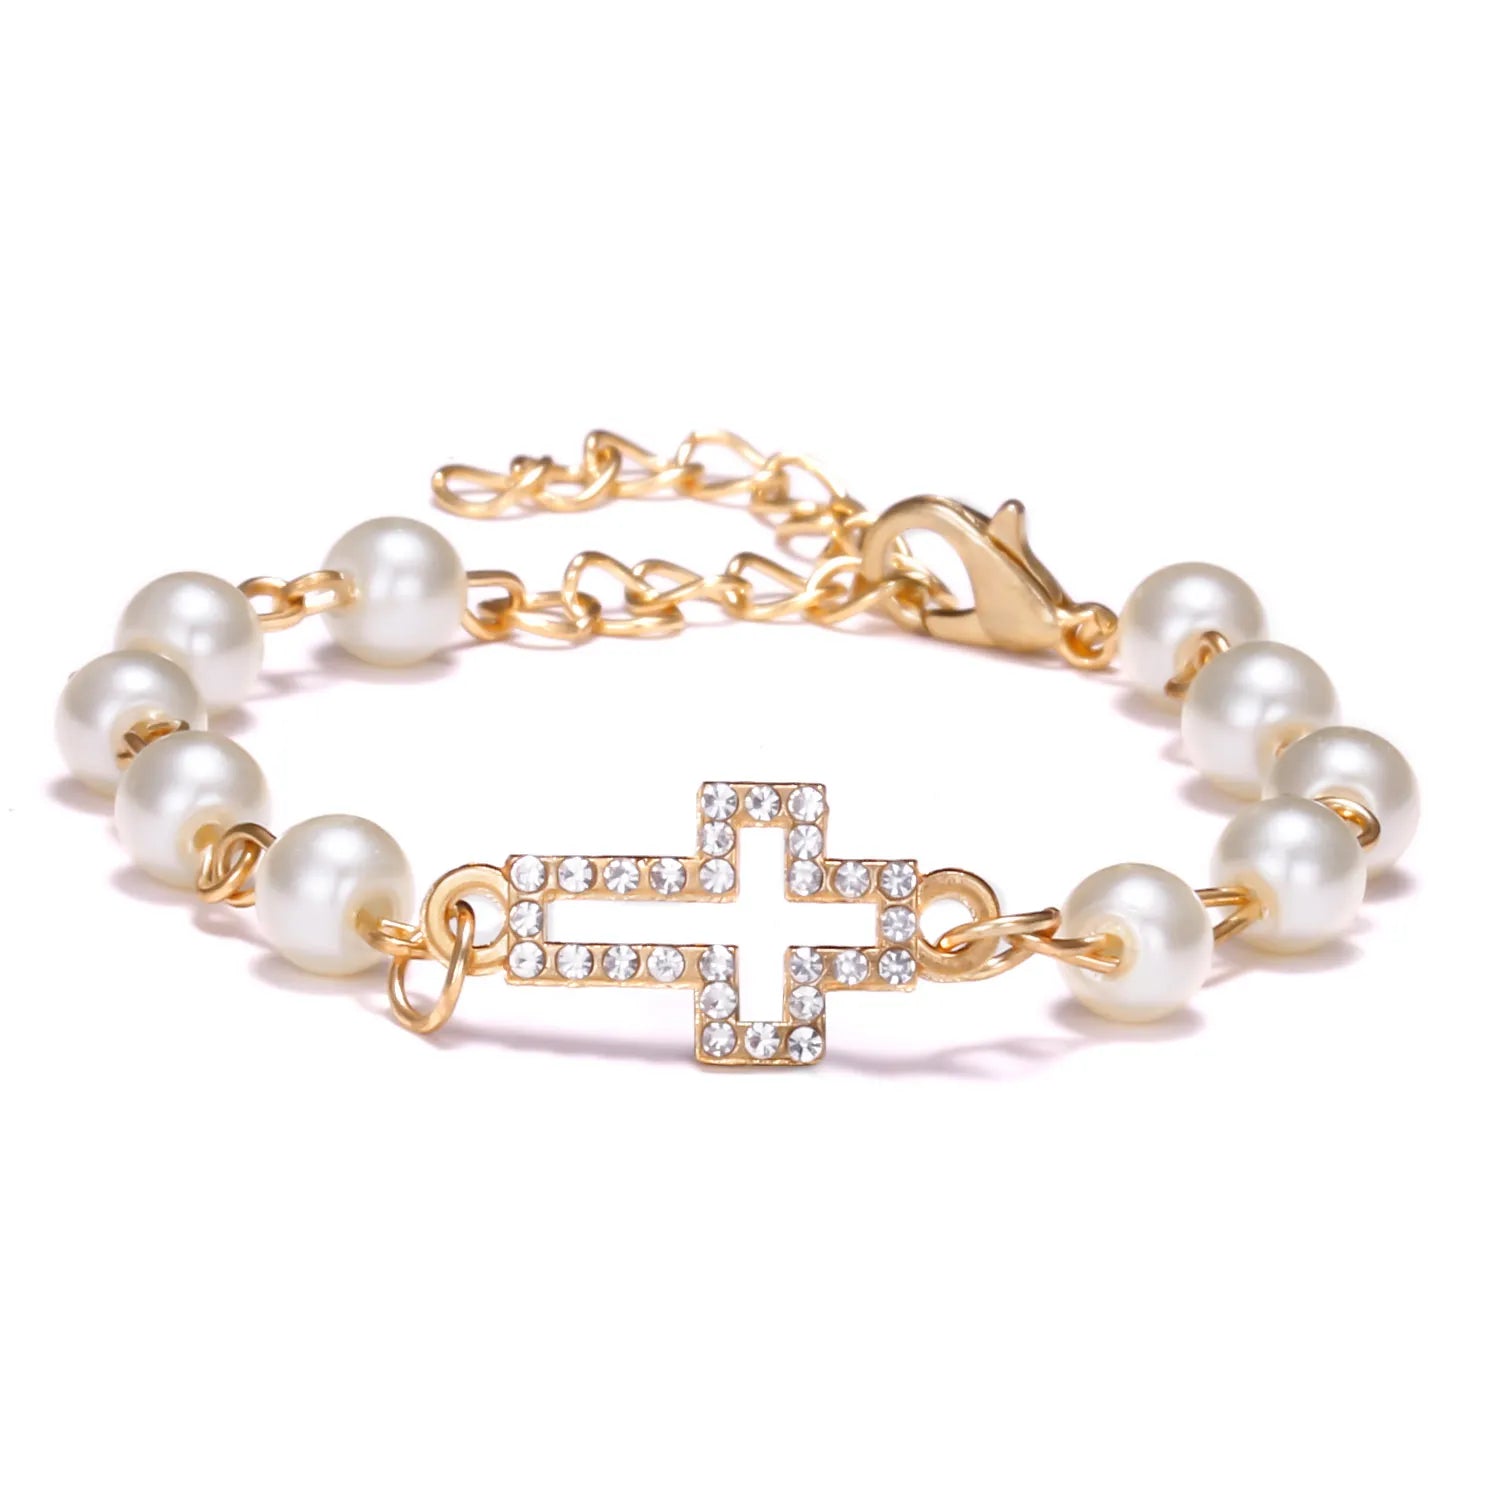 Mother-of-pearl Bracelet with Cross Pendant